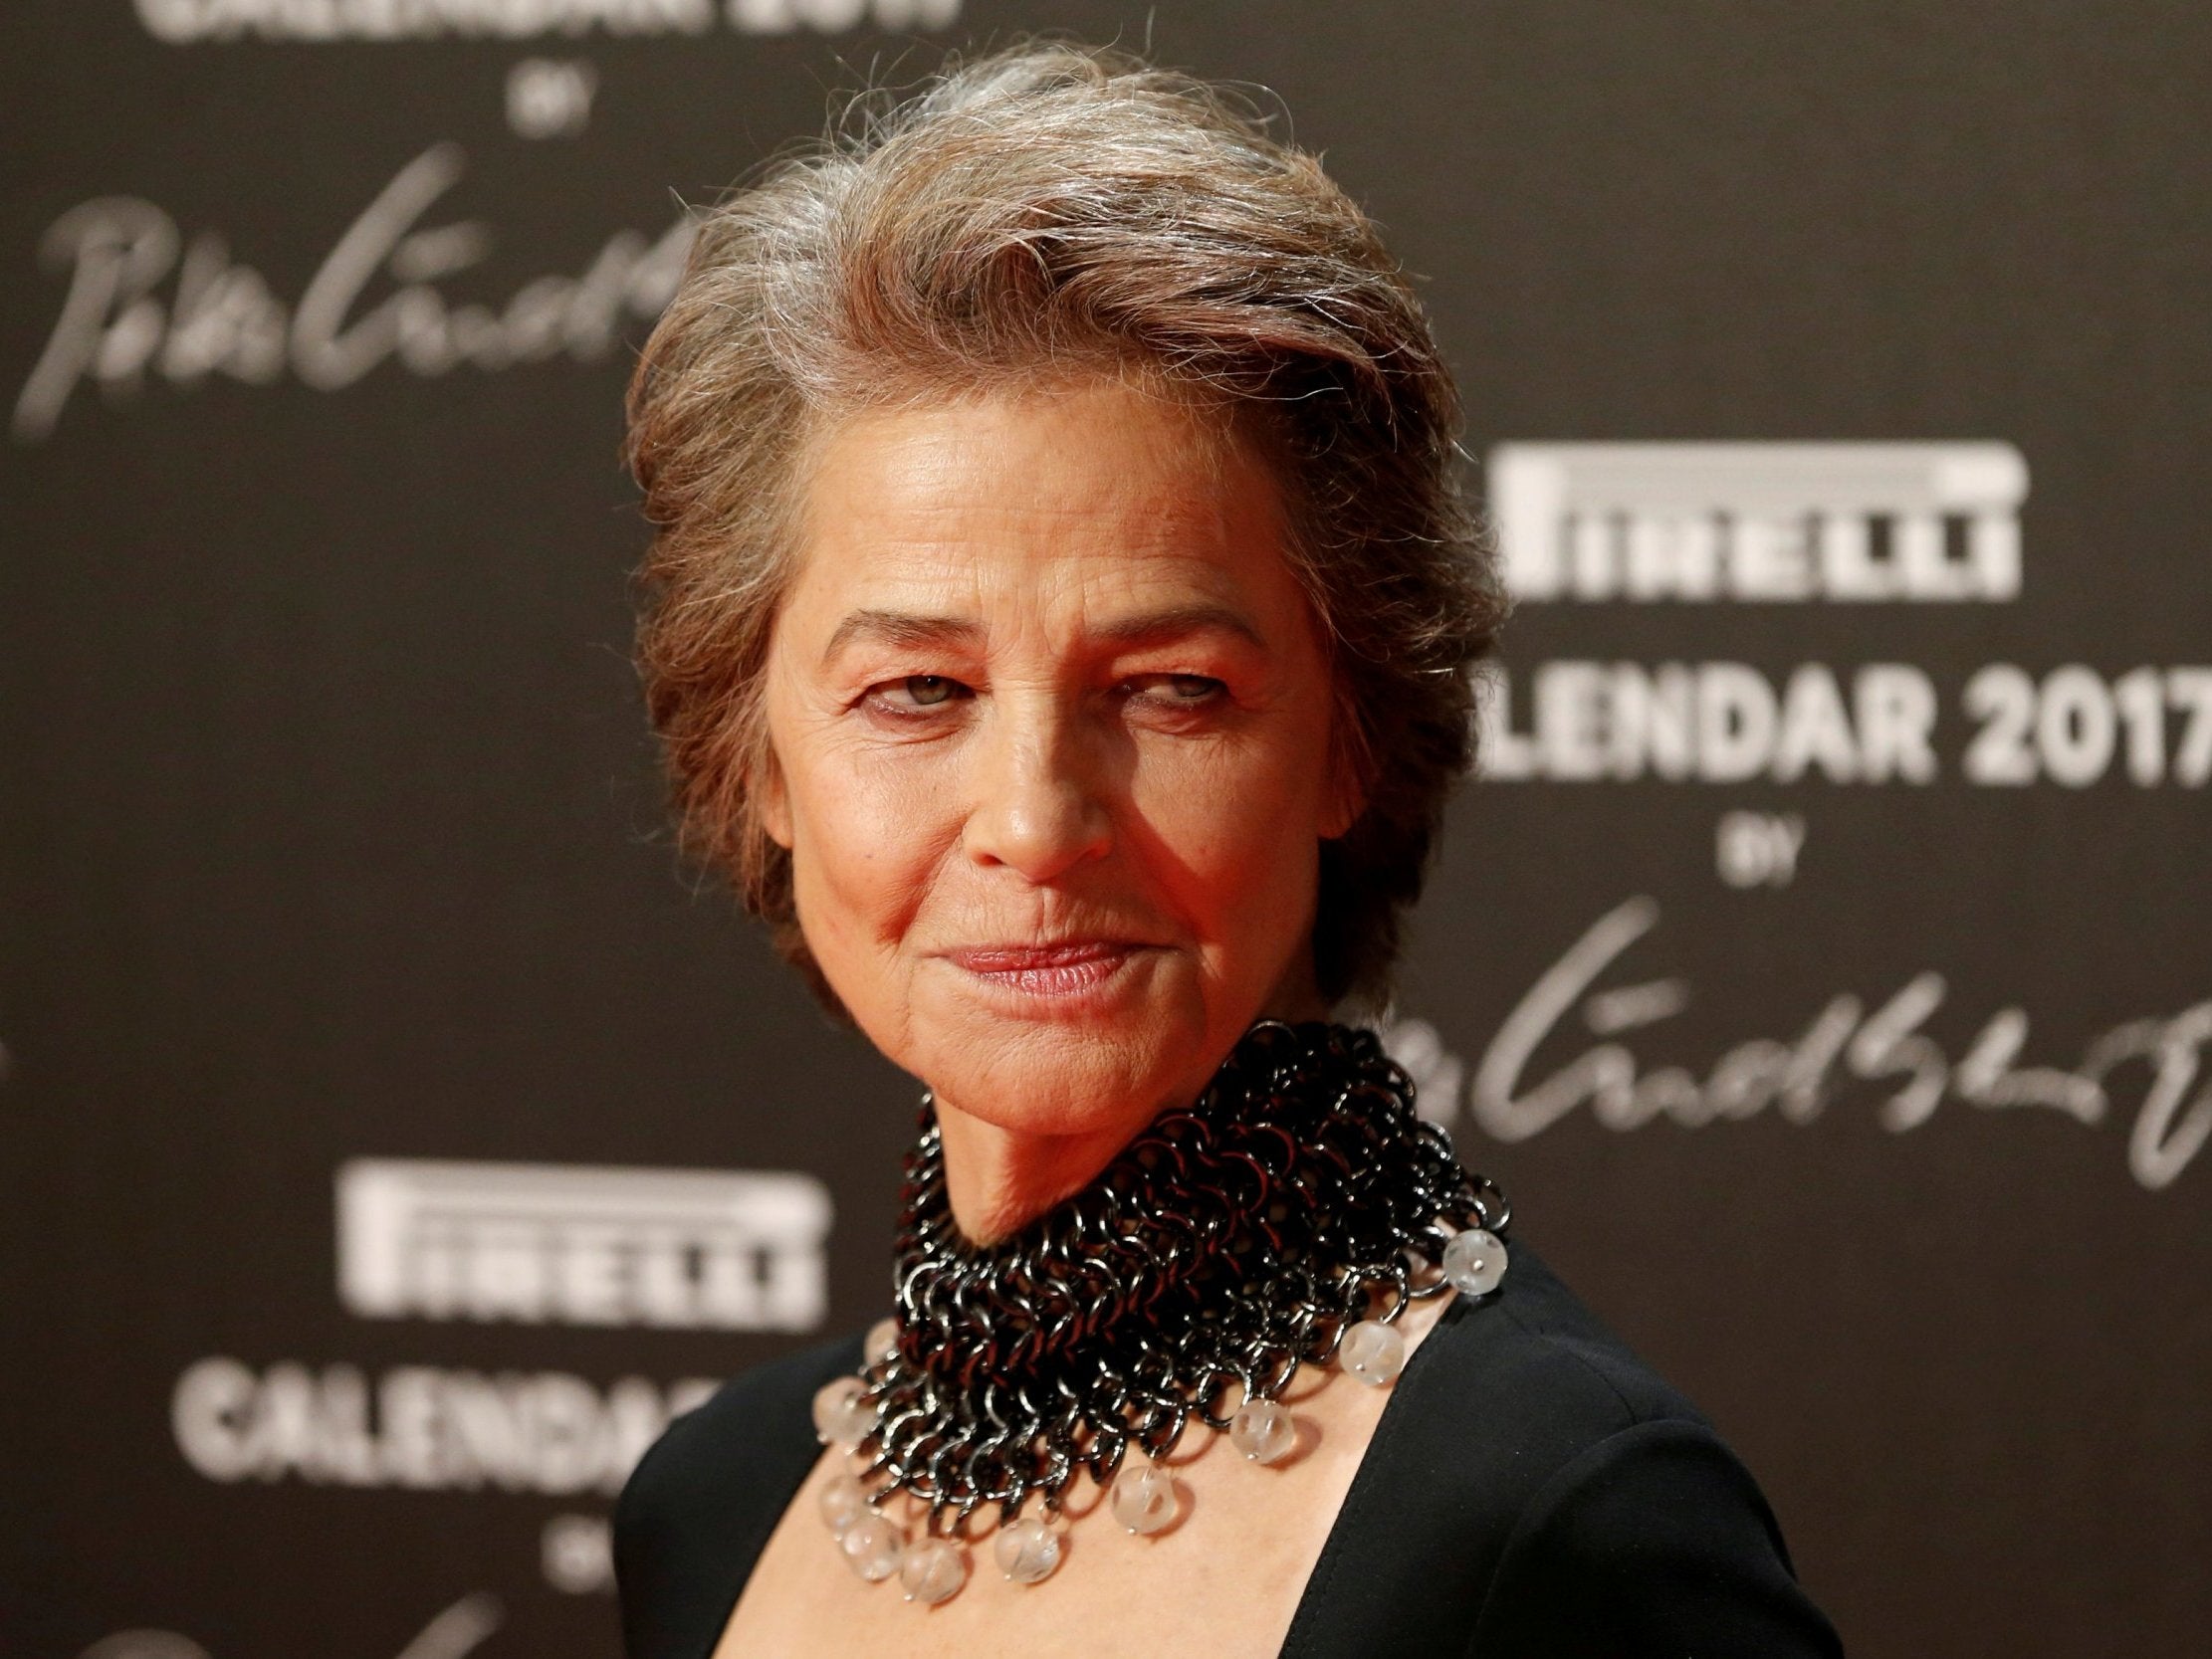 Charlotte Rampling will play Reverend Mother Mohiam, the emperor’s truthsayer